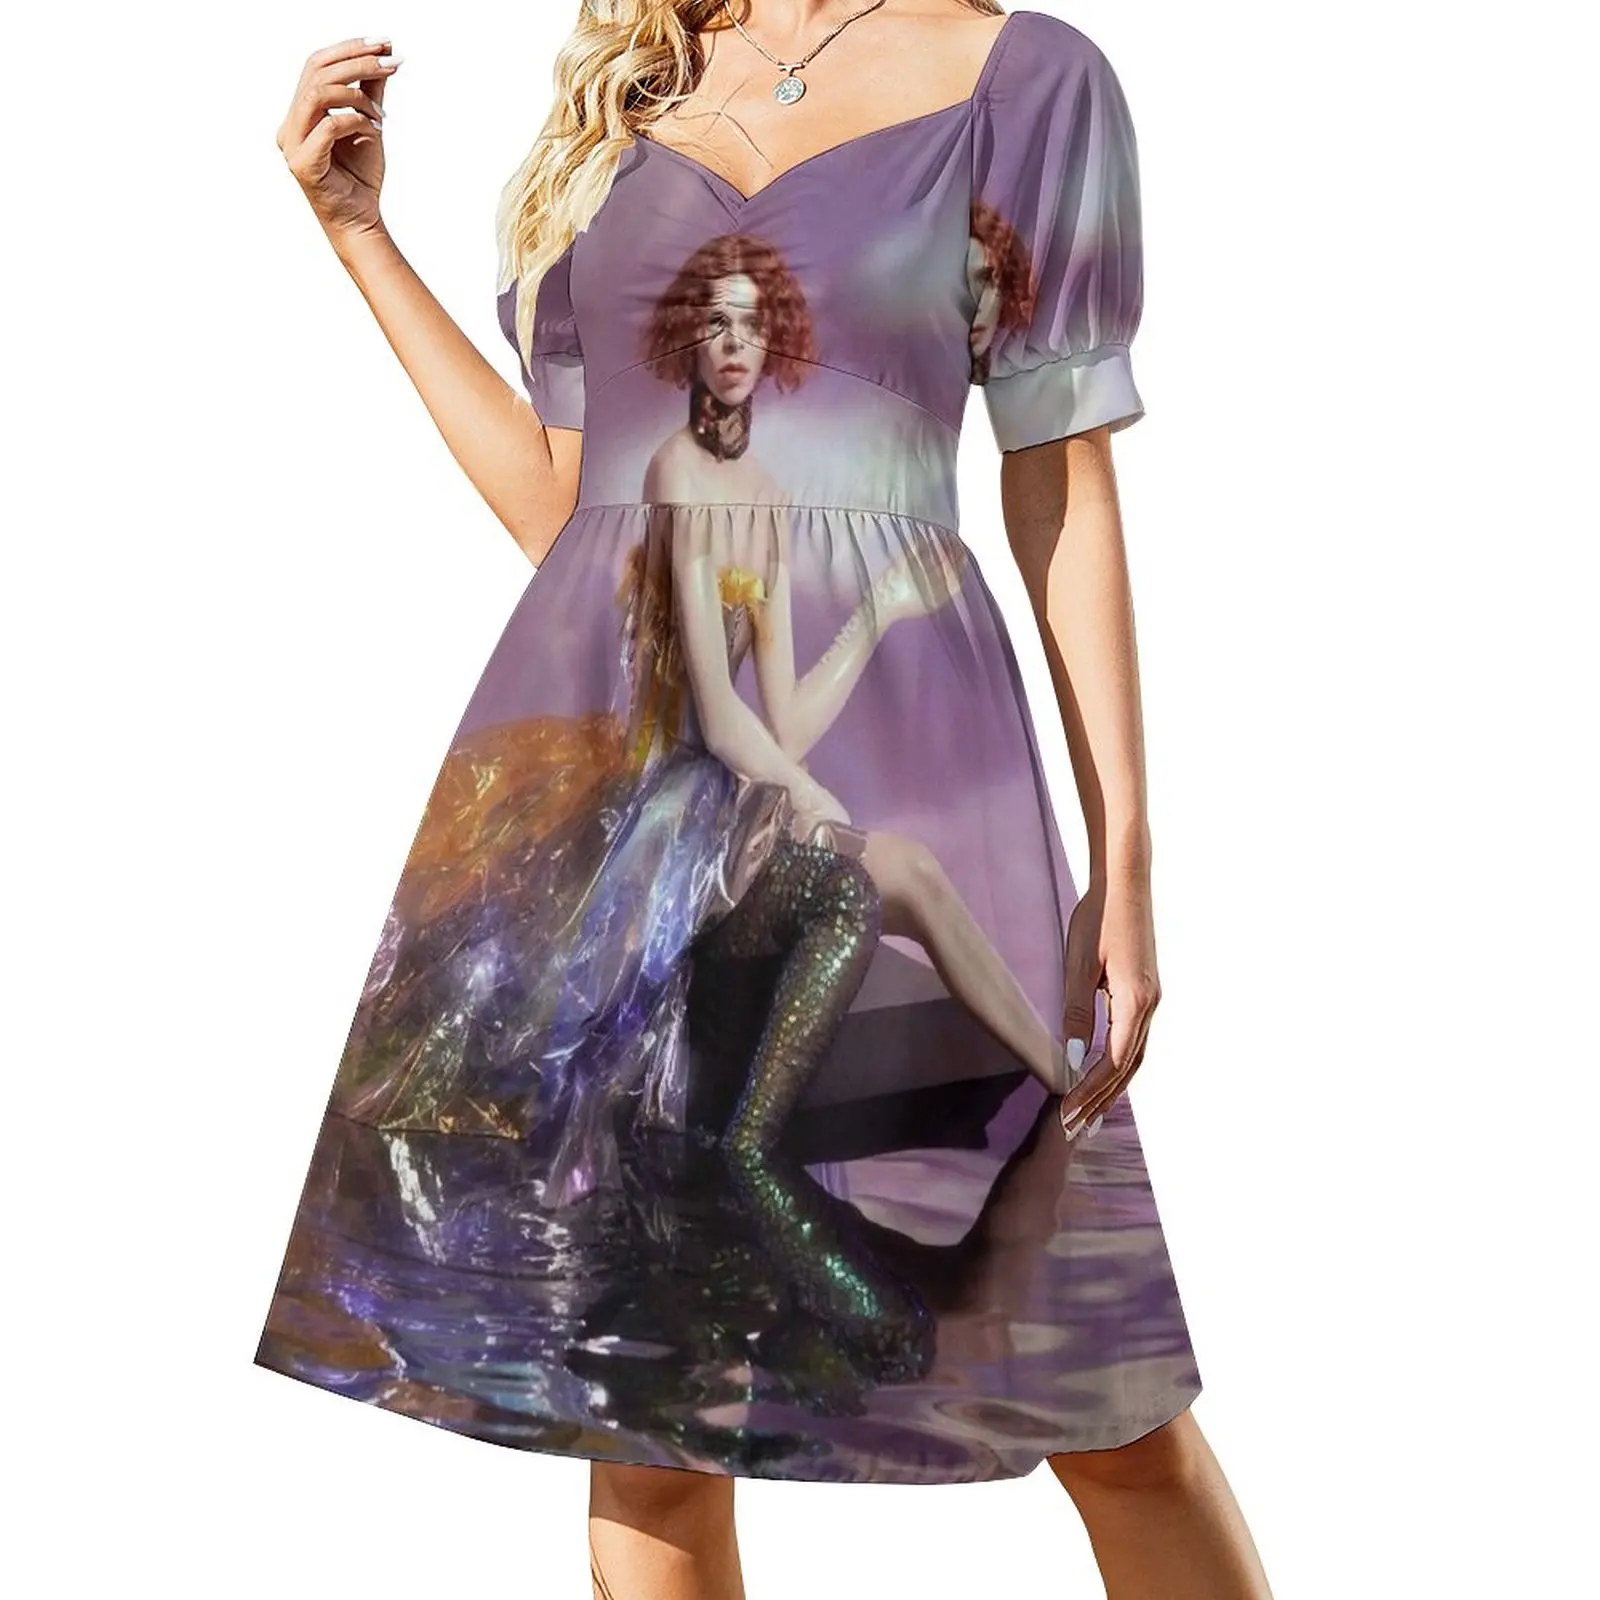 

SOPHIE - OIL OF EVERY PEARL’s UN-INSIDES Dress Long dress woman Female clothing